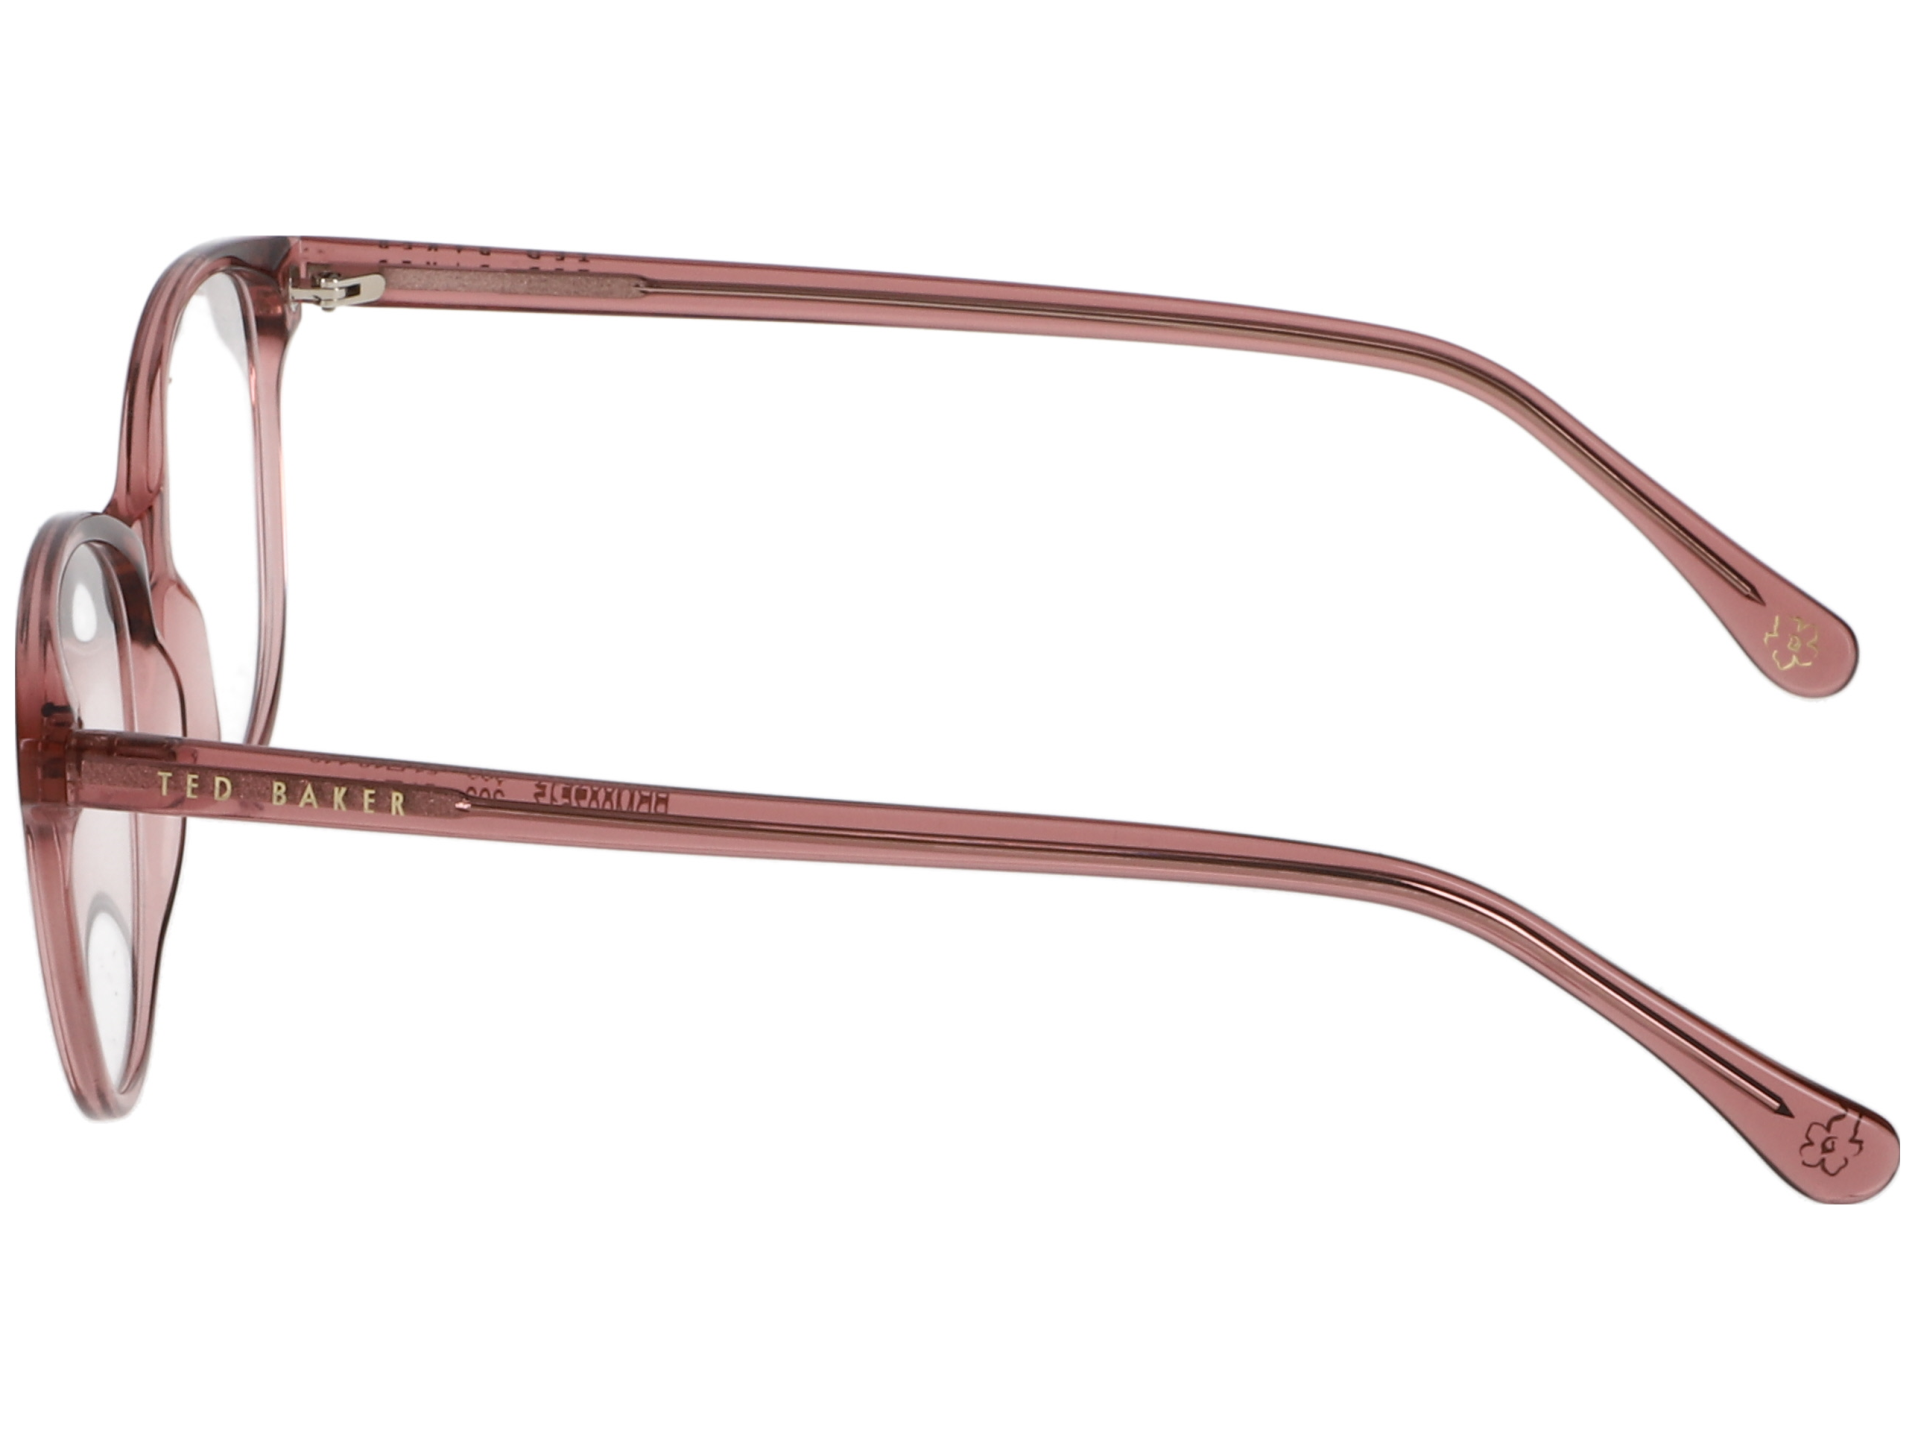 Ted Baker Brille 9236 202 51 rot